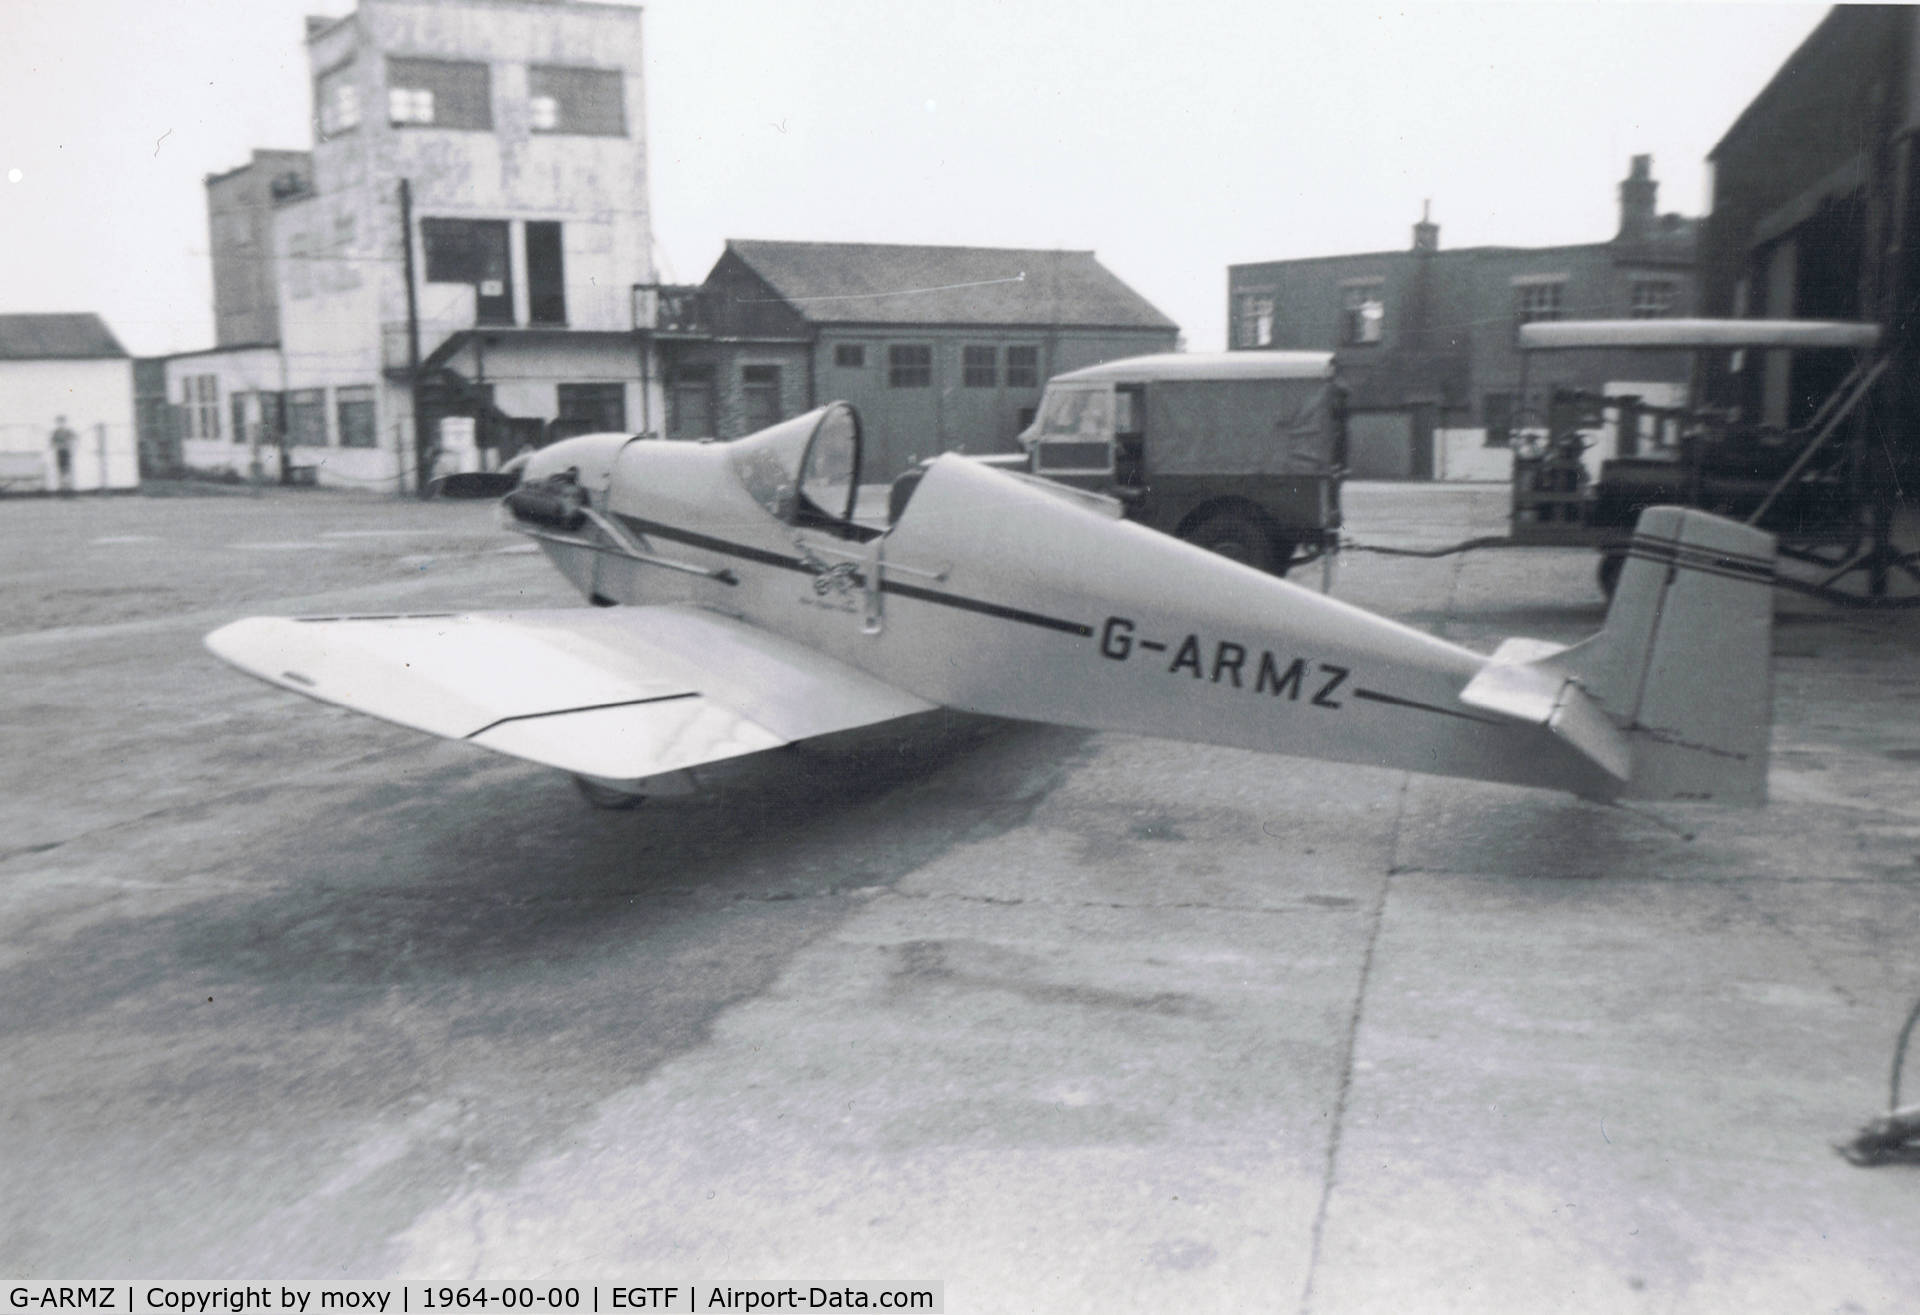 G-ARMZ, 1961 Rollason Druine D.31 Turbulent C/N PFA 565, Poor quality snap of Turbulent but shows Fairoaks in 1964. Ramp hasn't changed a great deal.